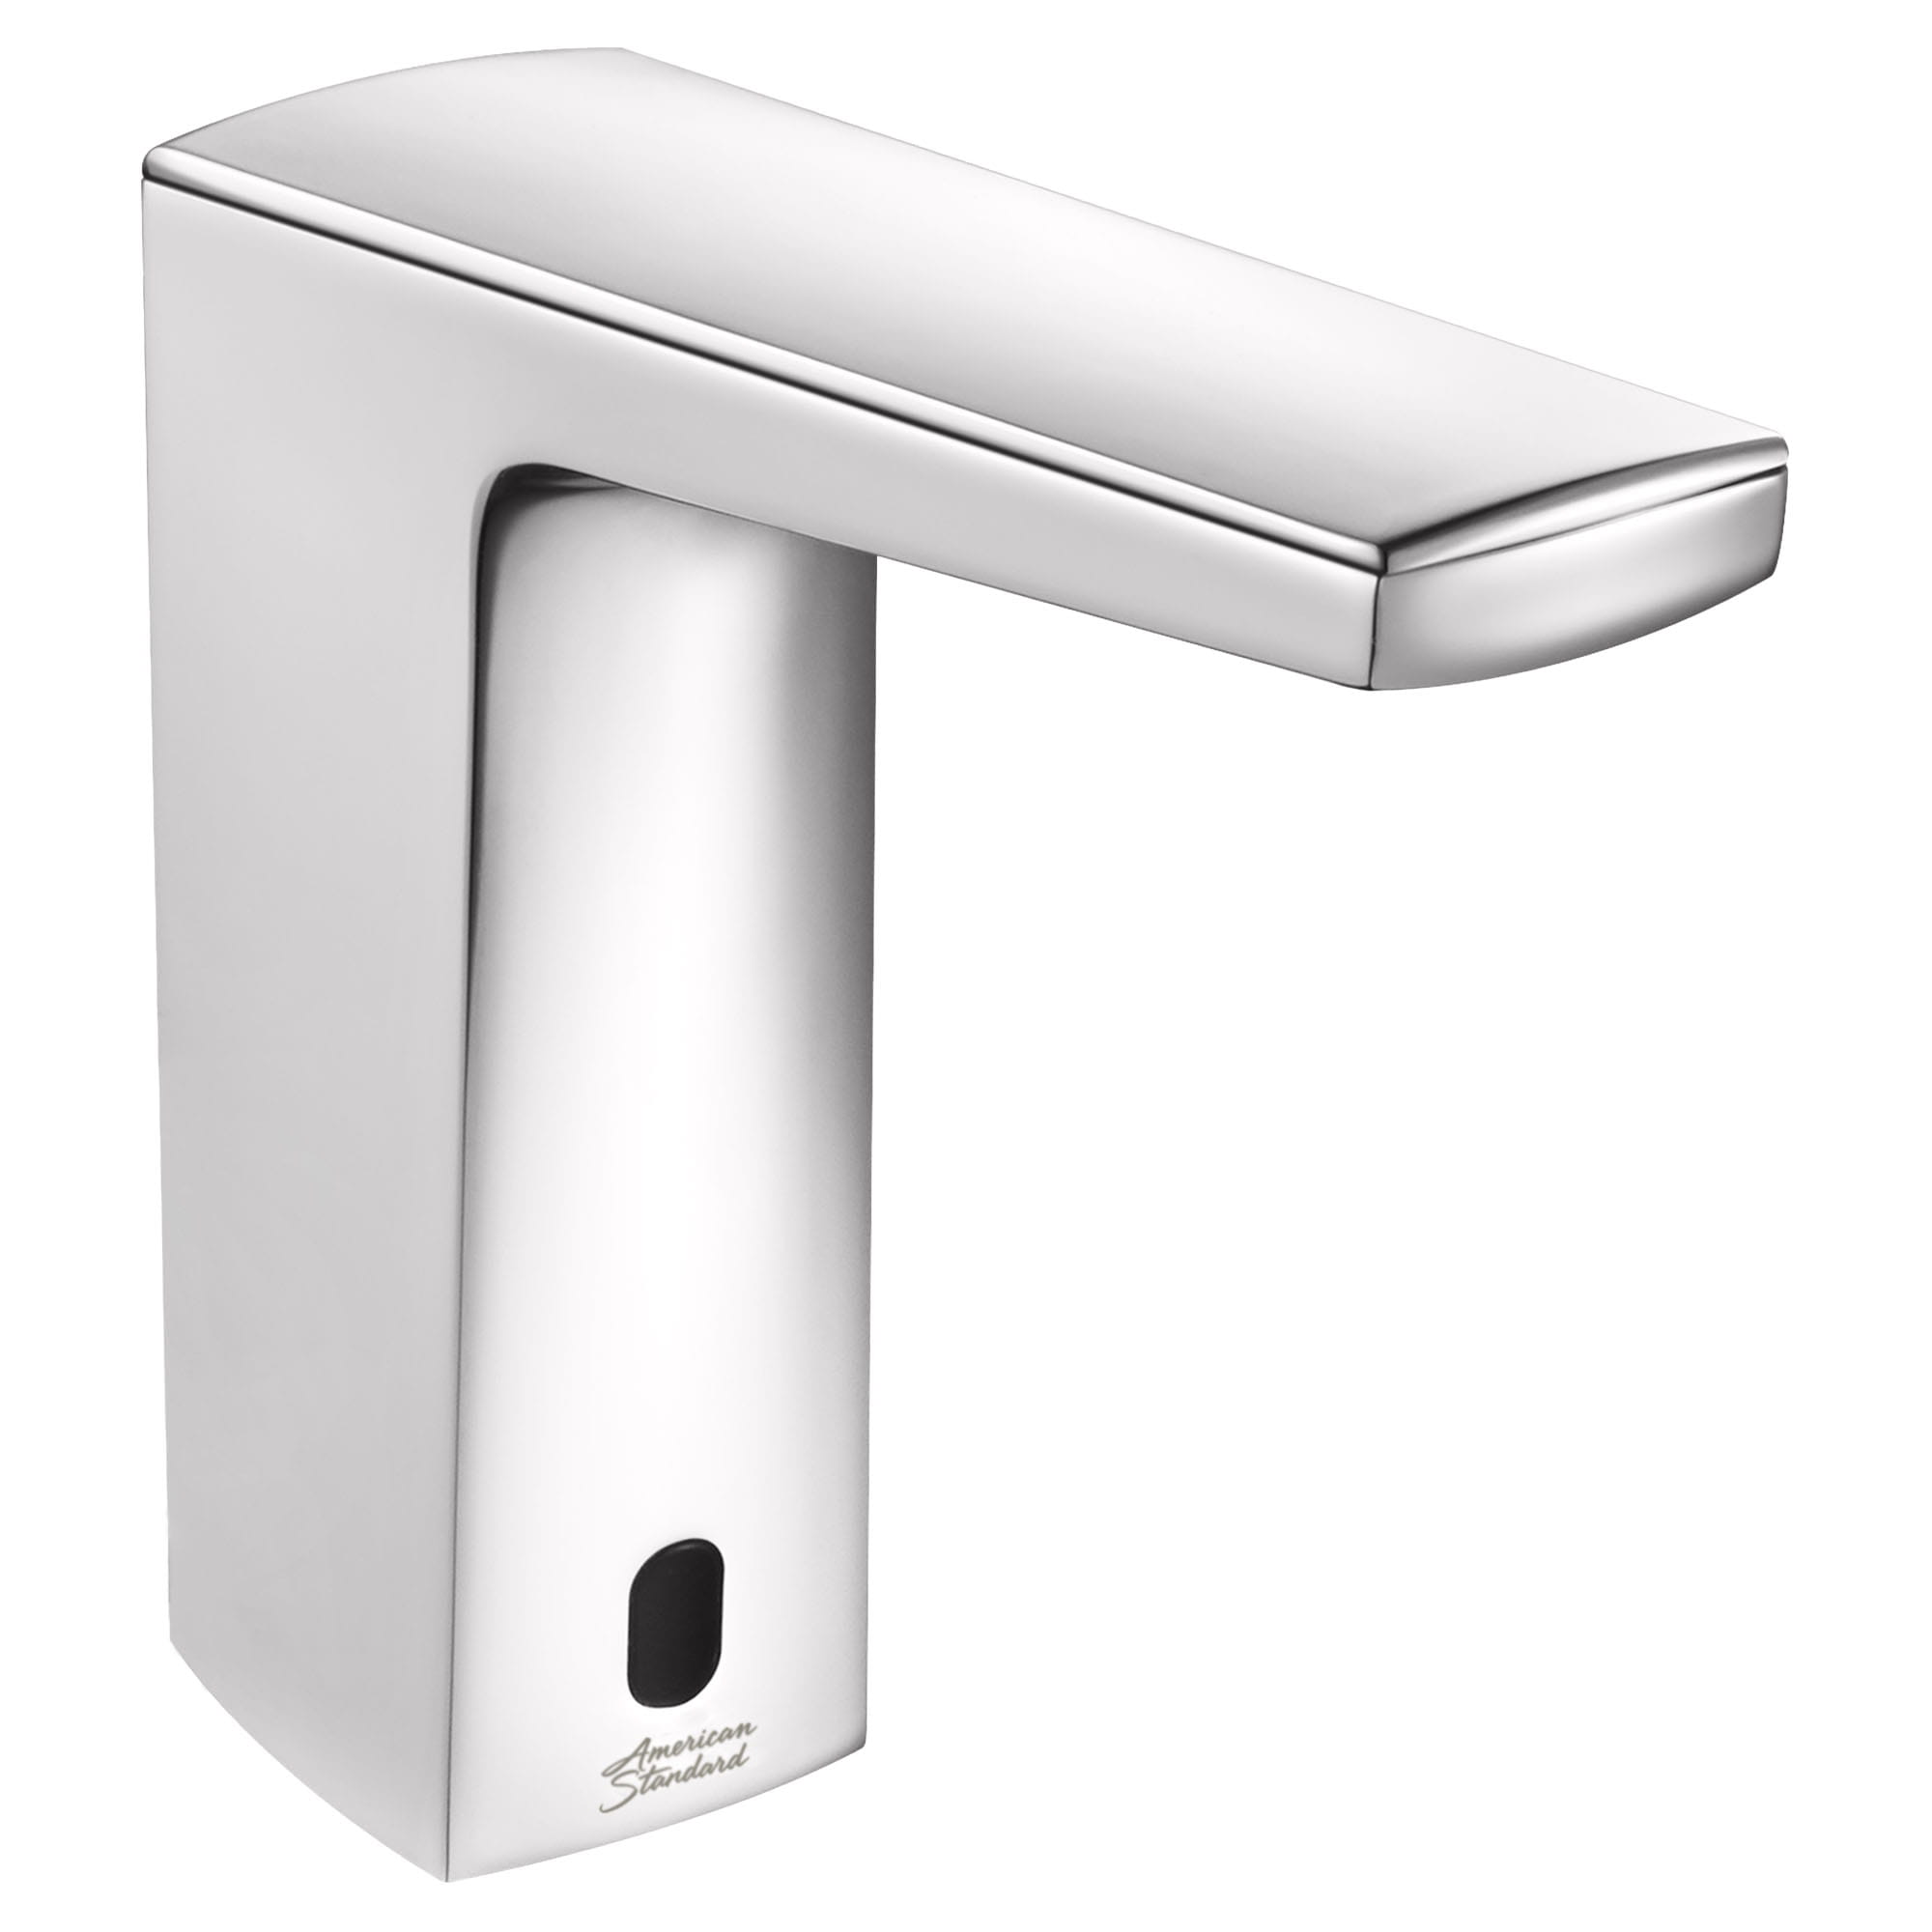 Paradigm® Selectronic® Touchless Faucet, Battery-Powered, 0.5 gpm/1.9 Lpm